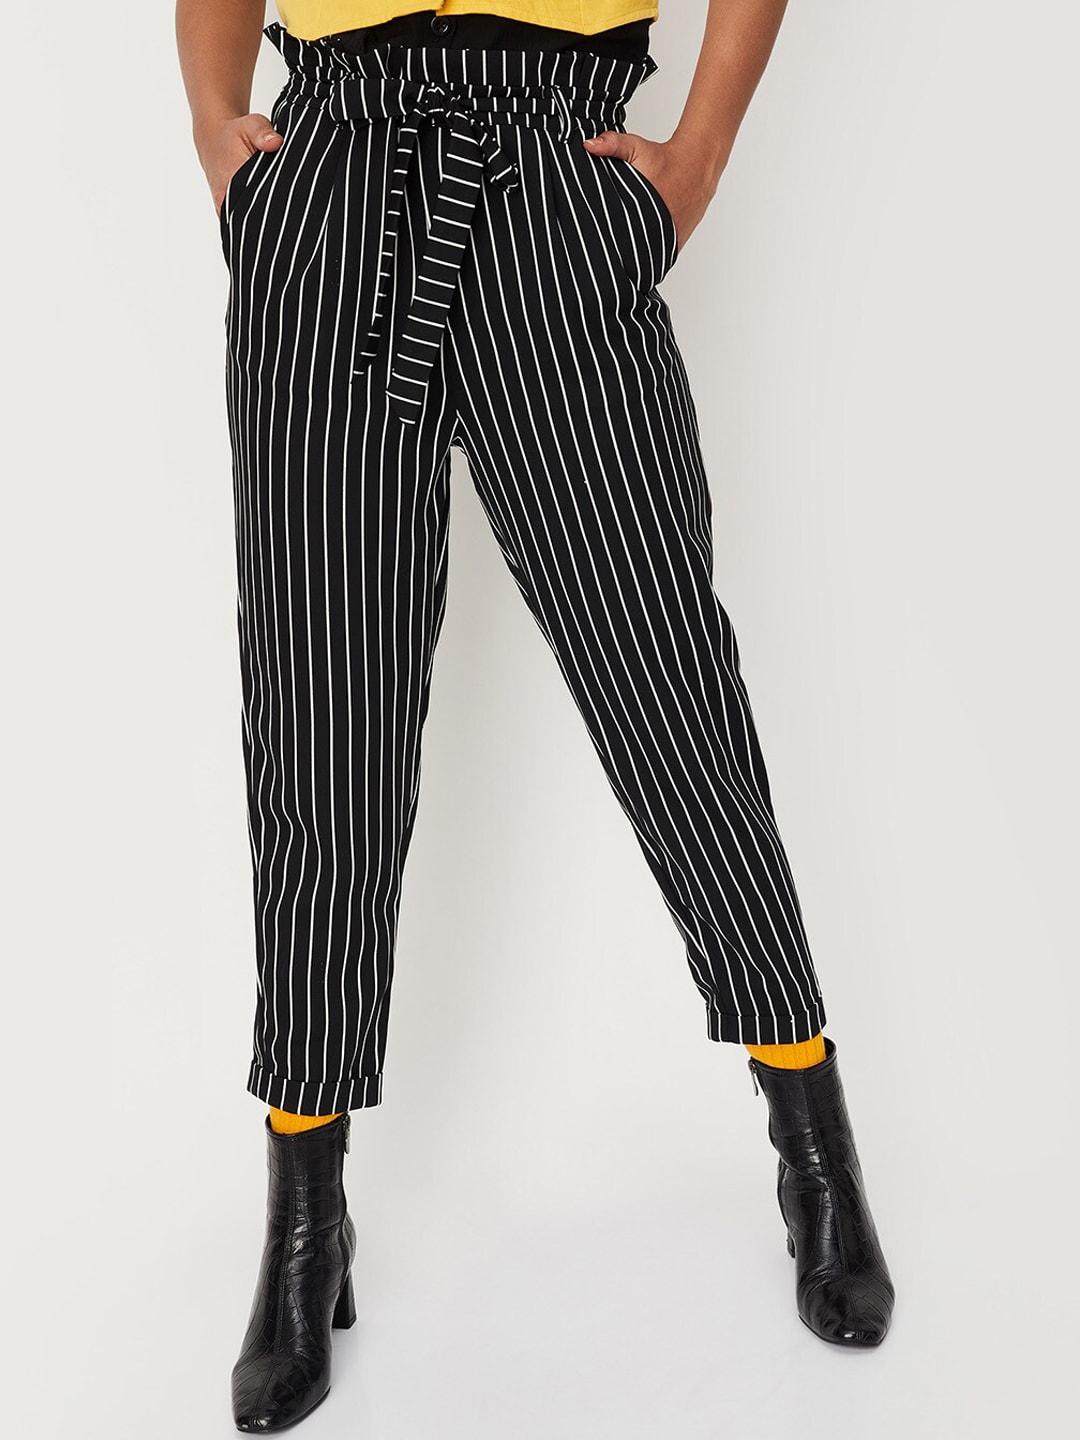 max-women-striped-trousers